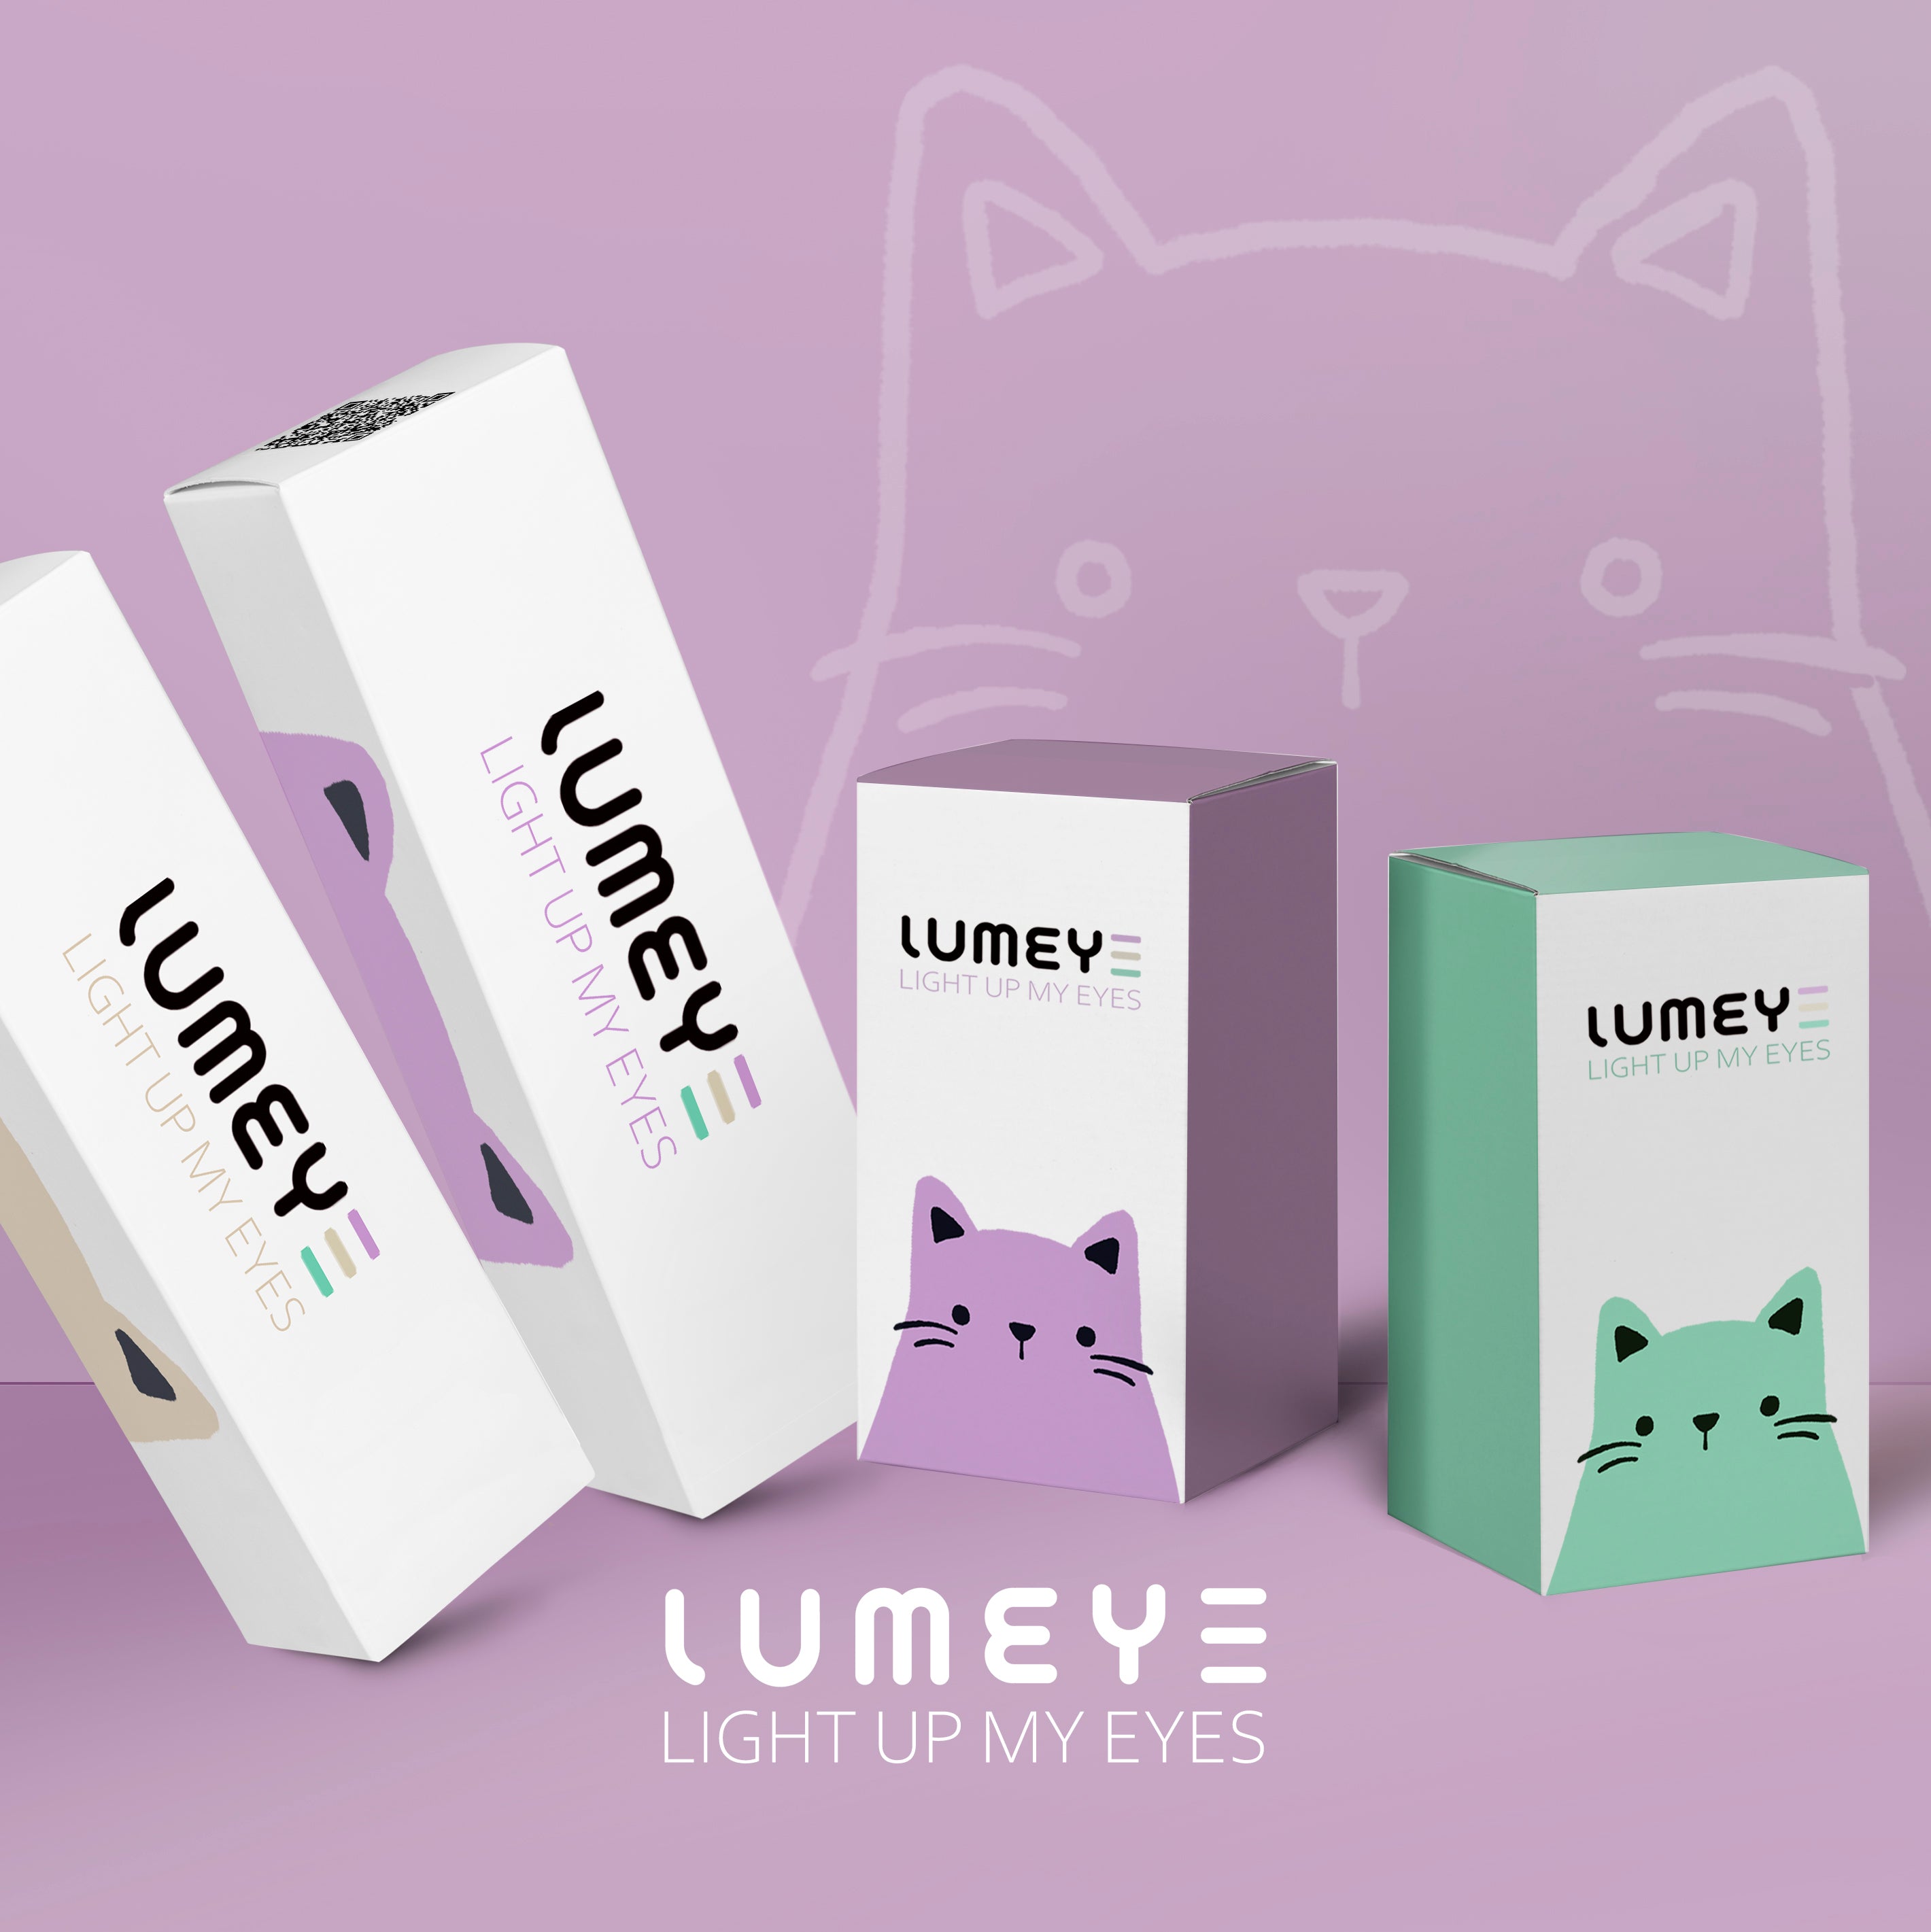 Best COLORED CONTACTS - LUMEYE Gold Foil Black Colored Contact Lenses - LUMEYE